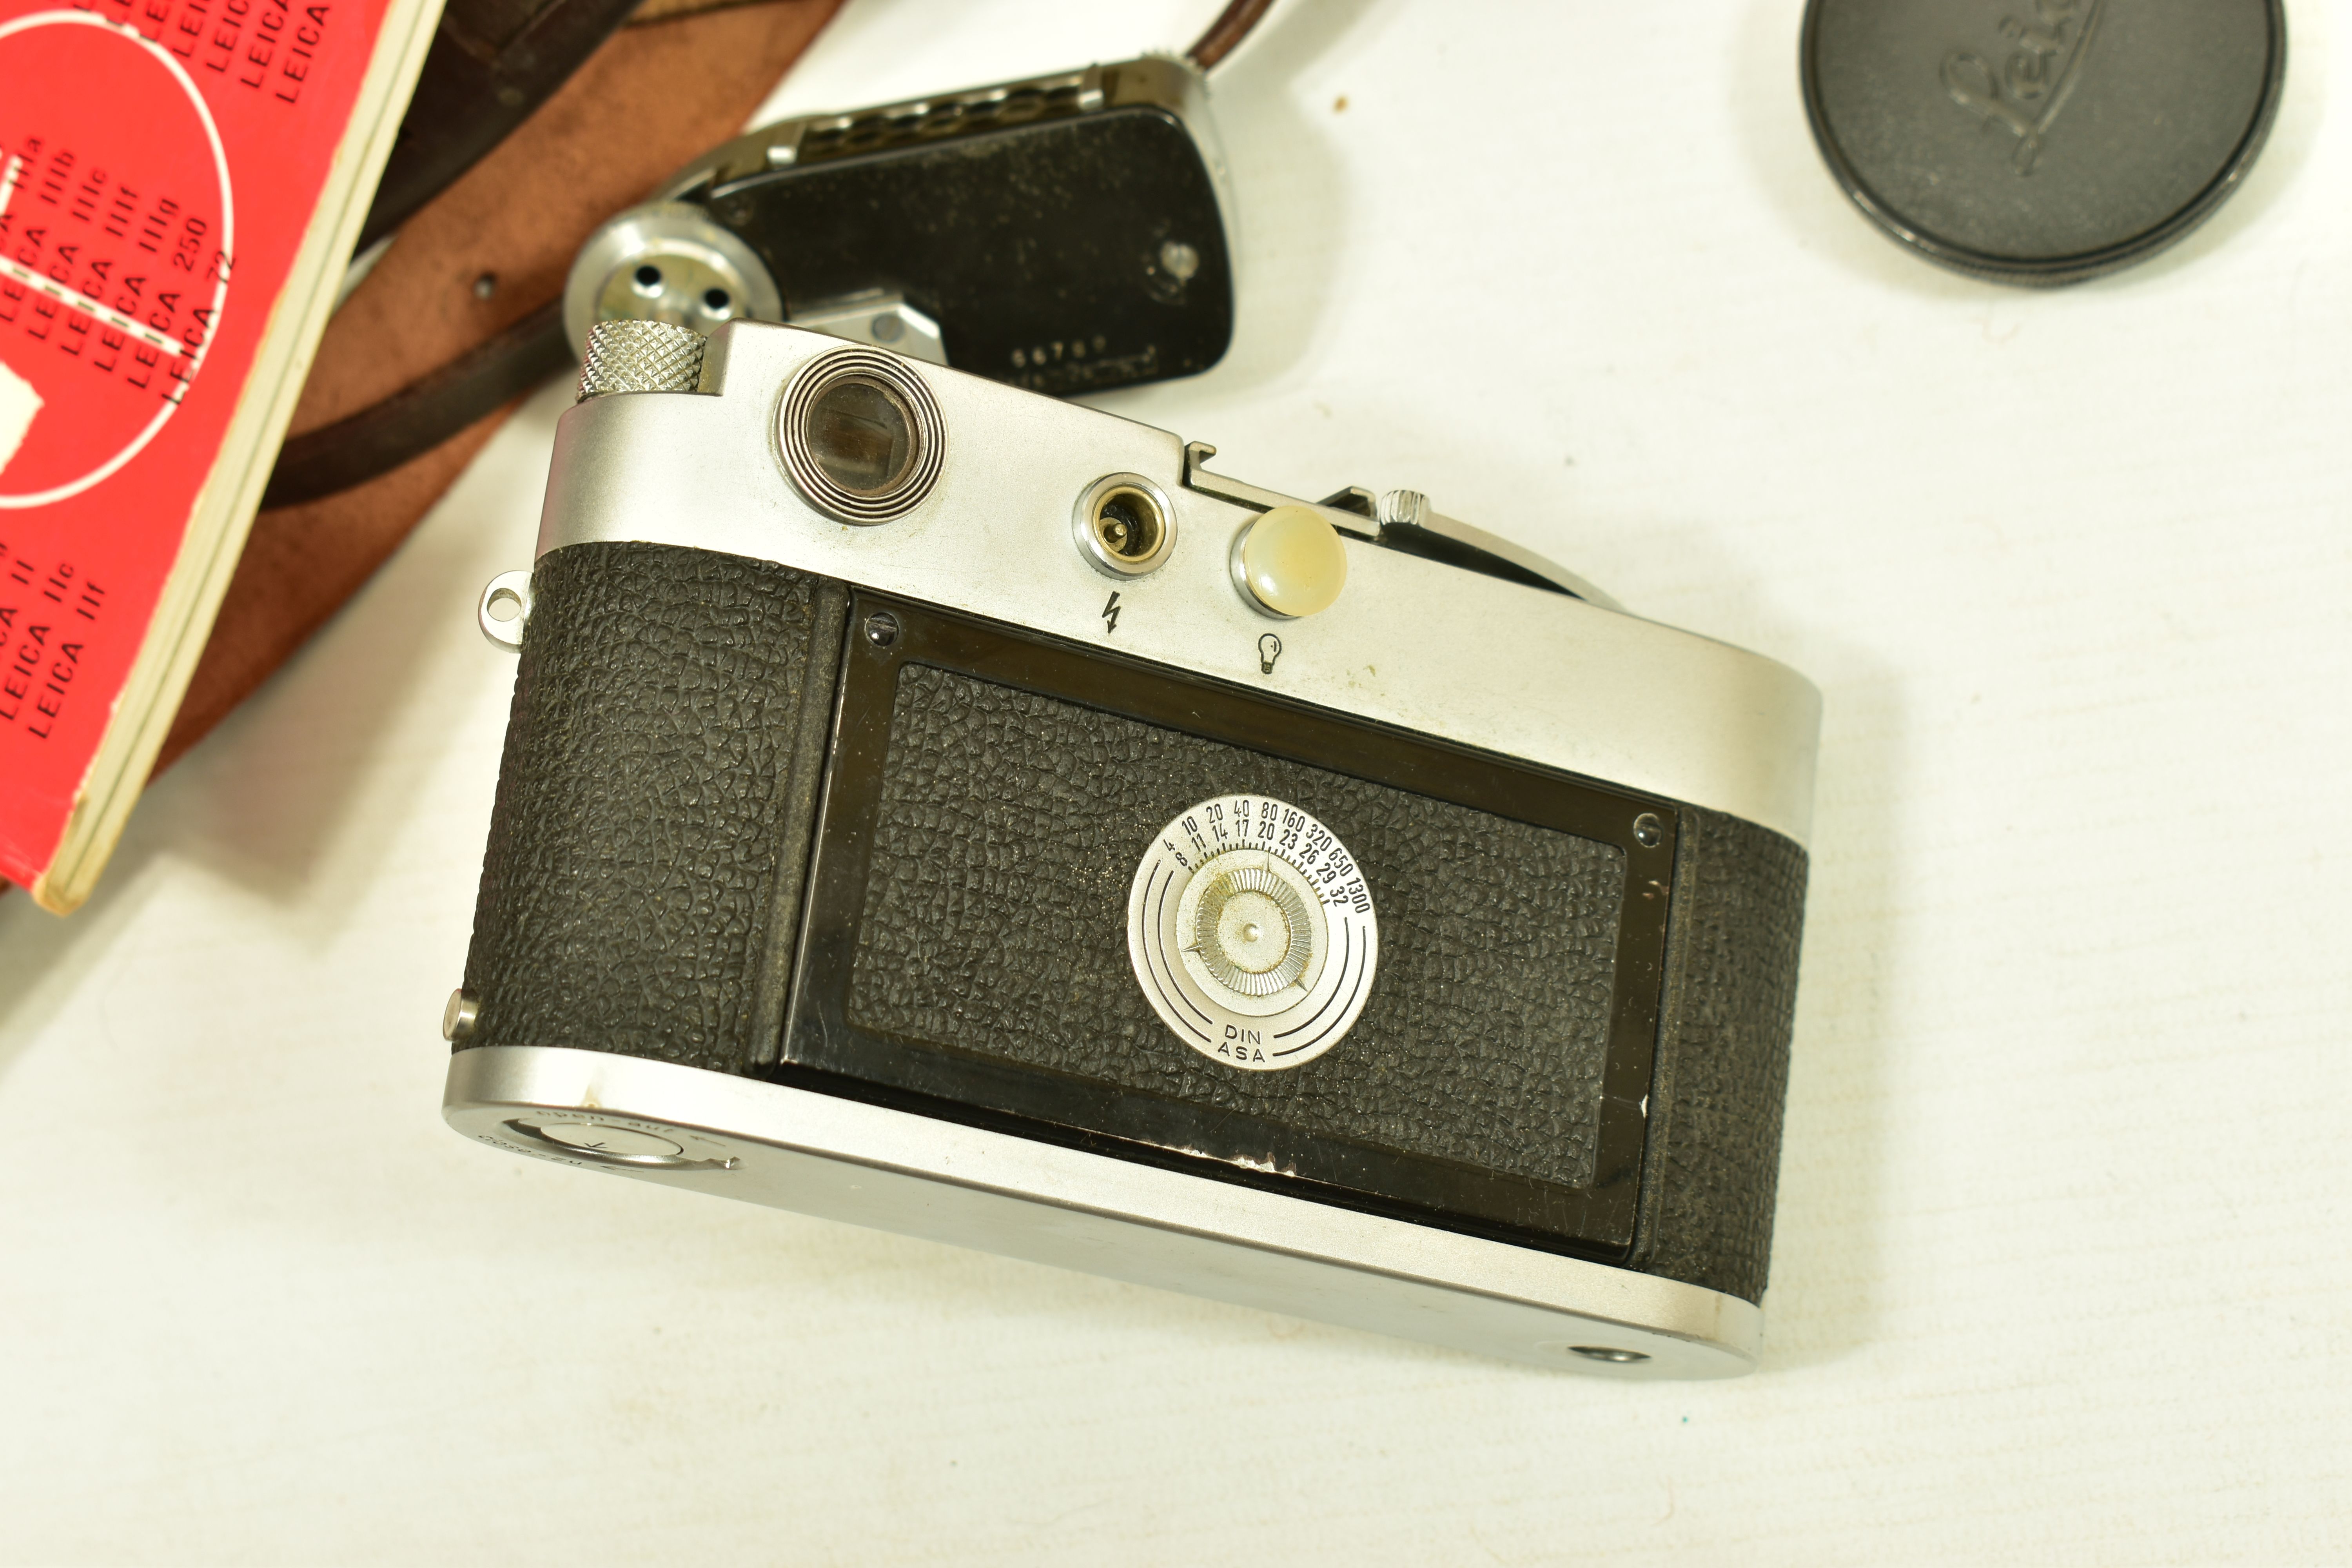 A LEICA M2 FILM CAMERA Serial No 1004152 fitted with an Elmar 50mm f2.8 lens Serial no 1728234 ( - Image 3 of 6